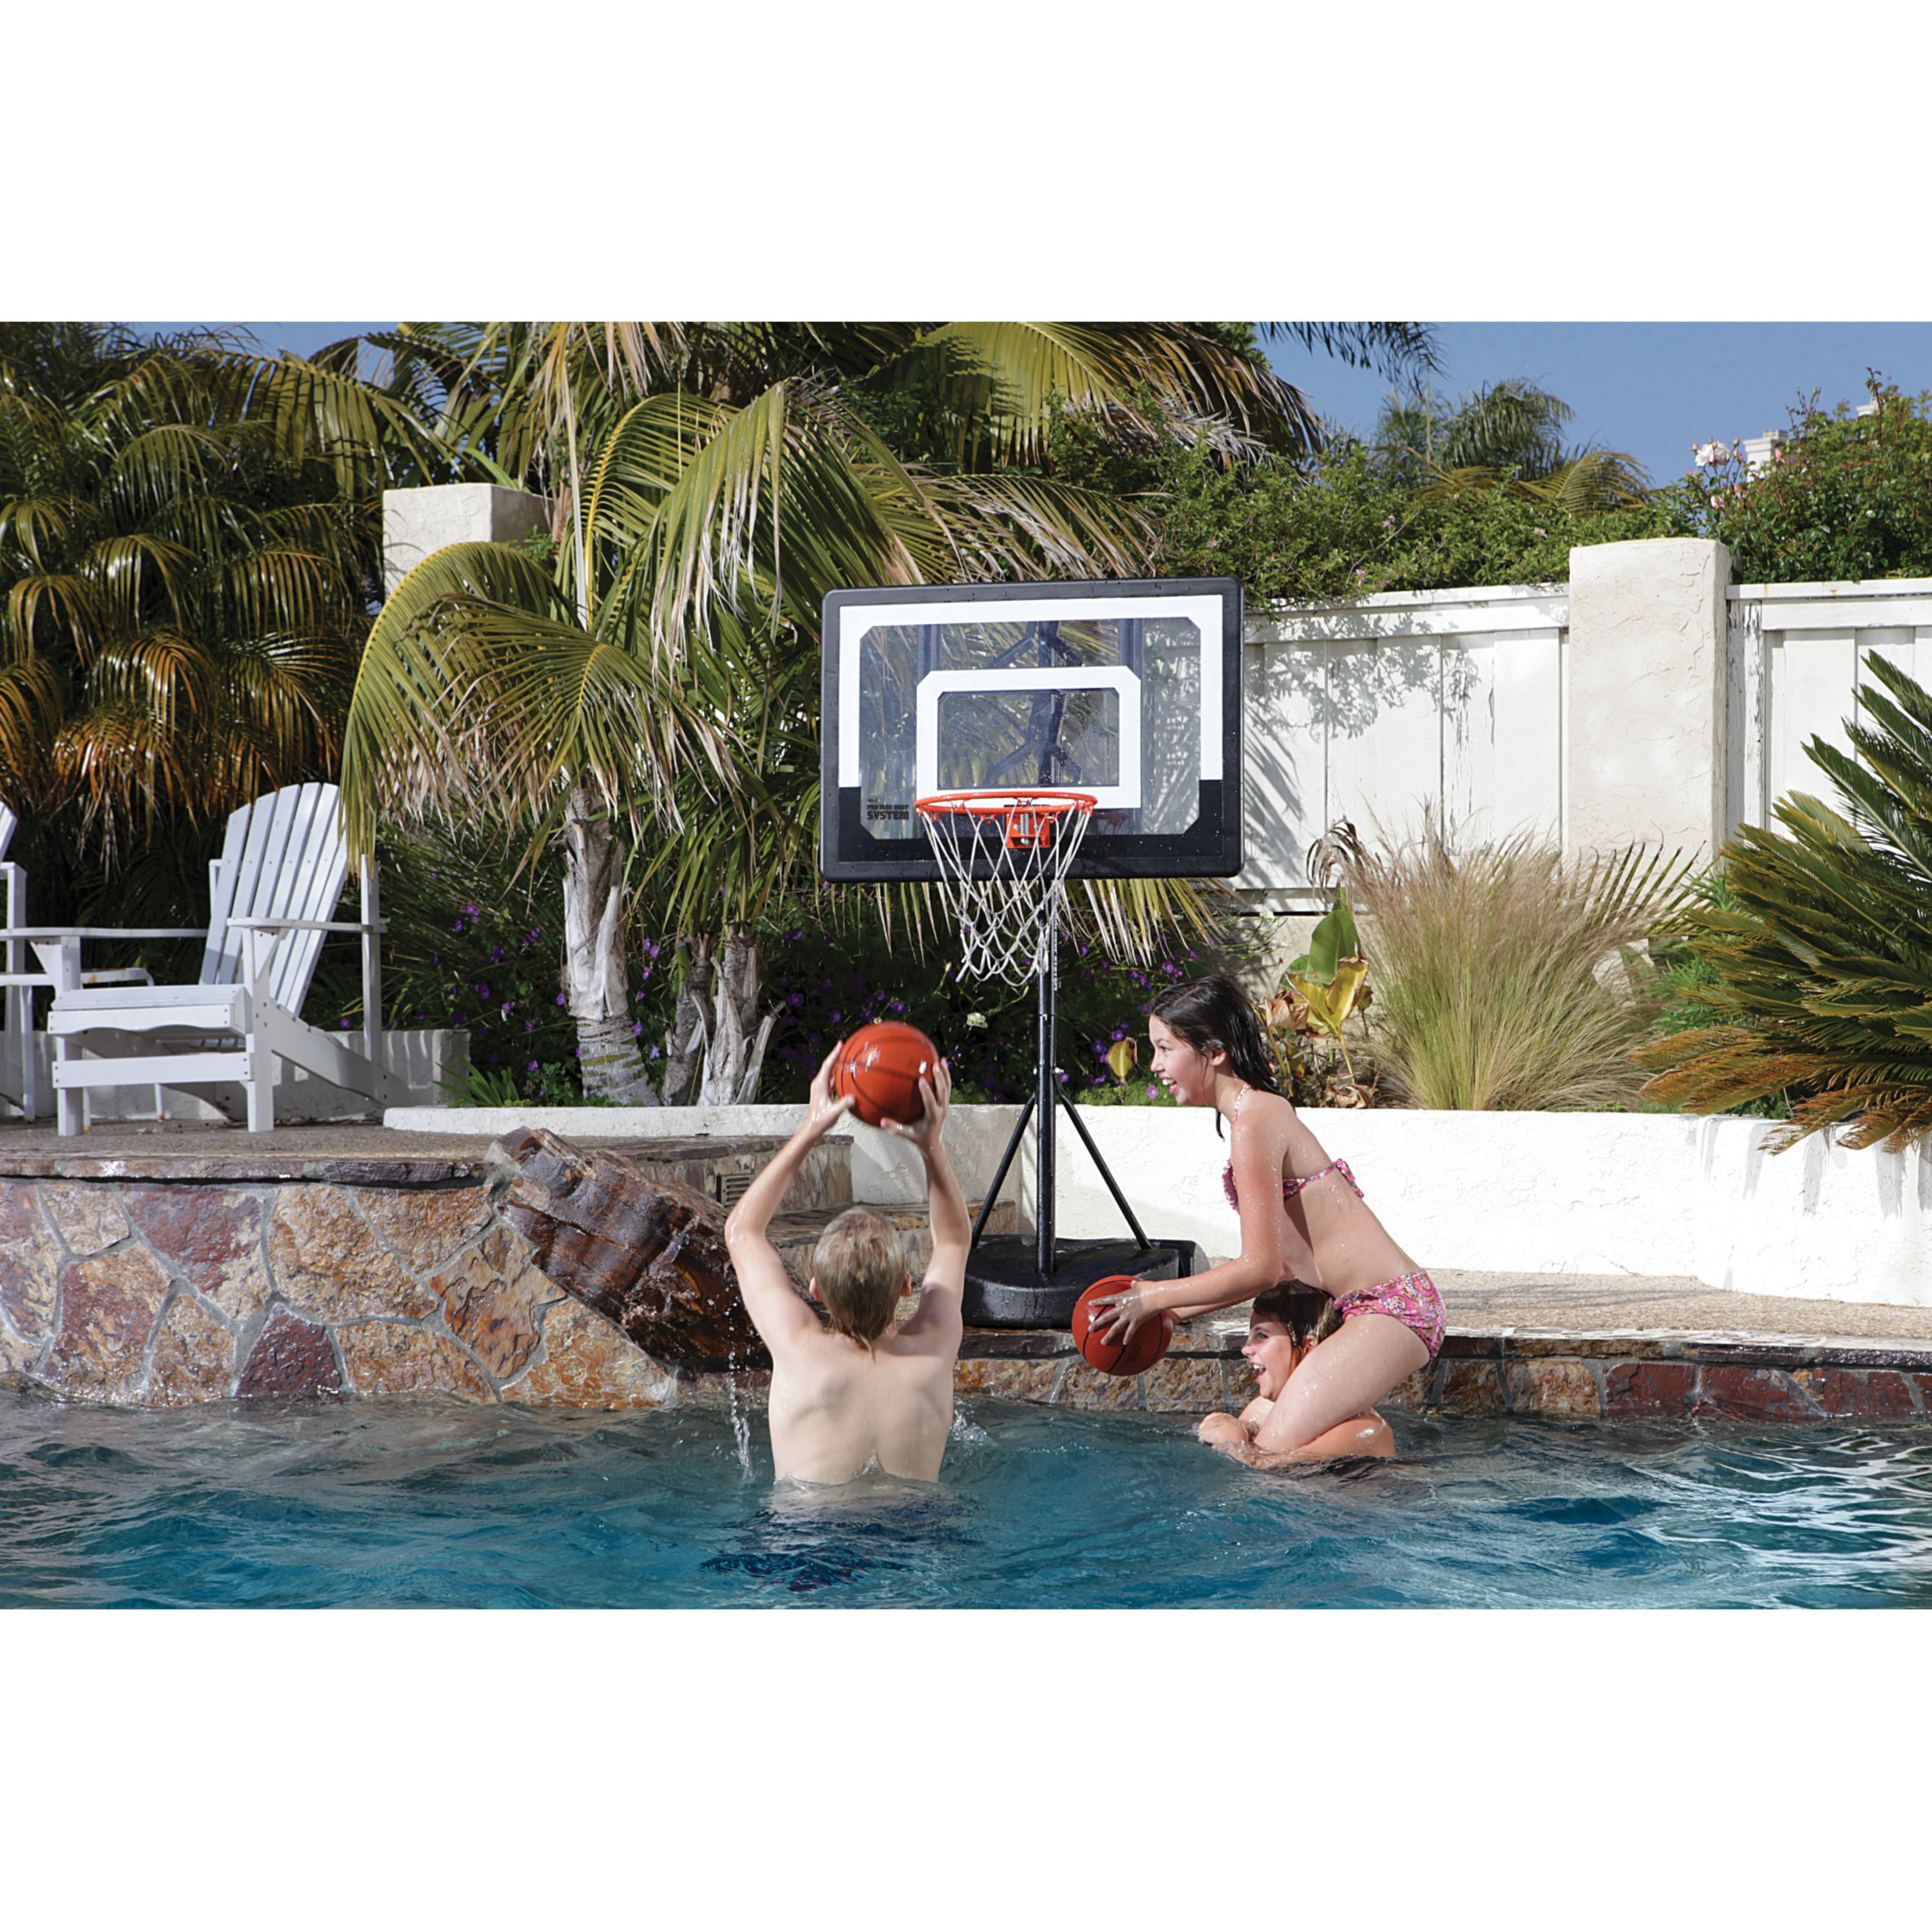 SKLZ Pro Mini Portable Basketball System Hoop with Adjustable Height 3.5 to 7 Ft., Includes 7 In. Mini Ball - image 3 of 12